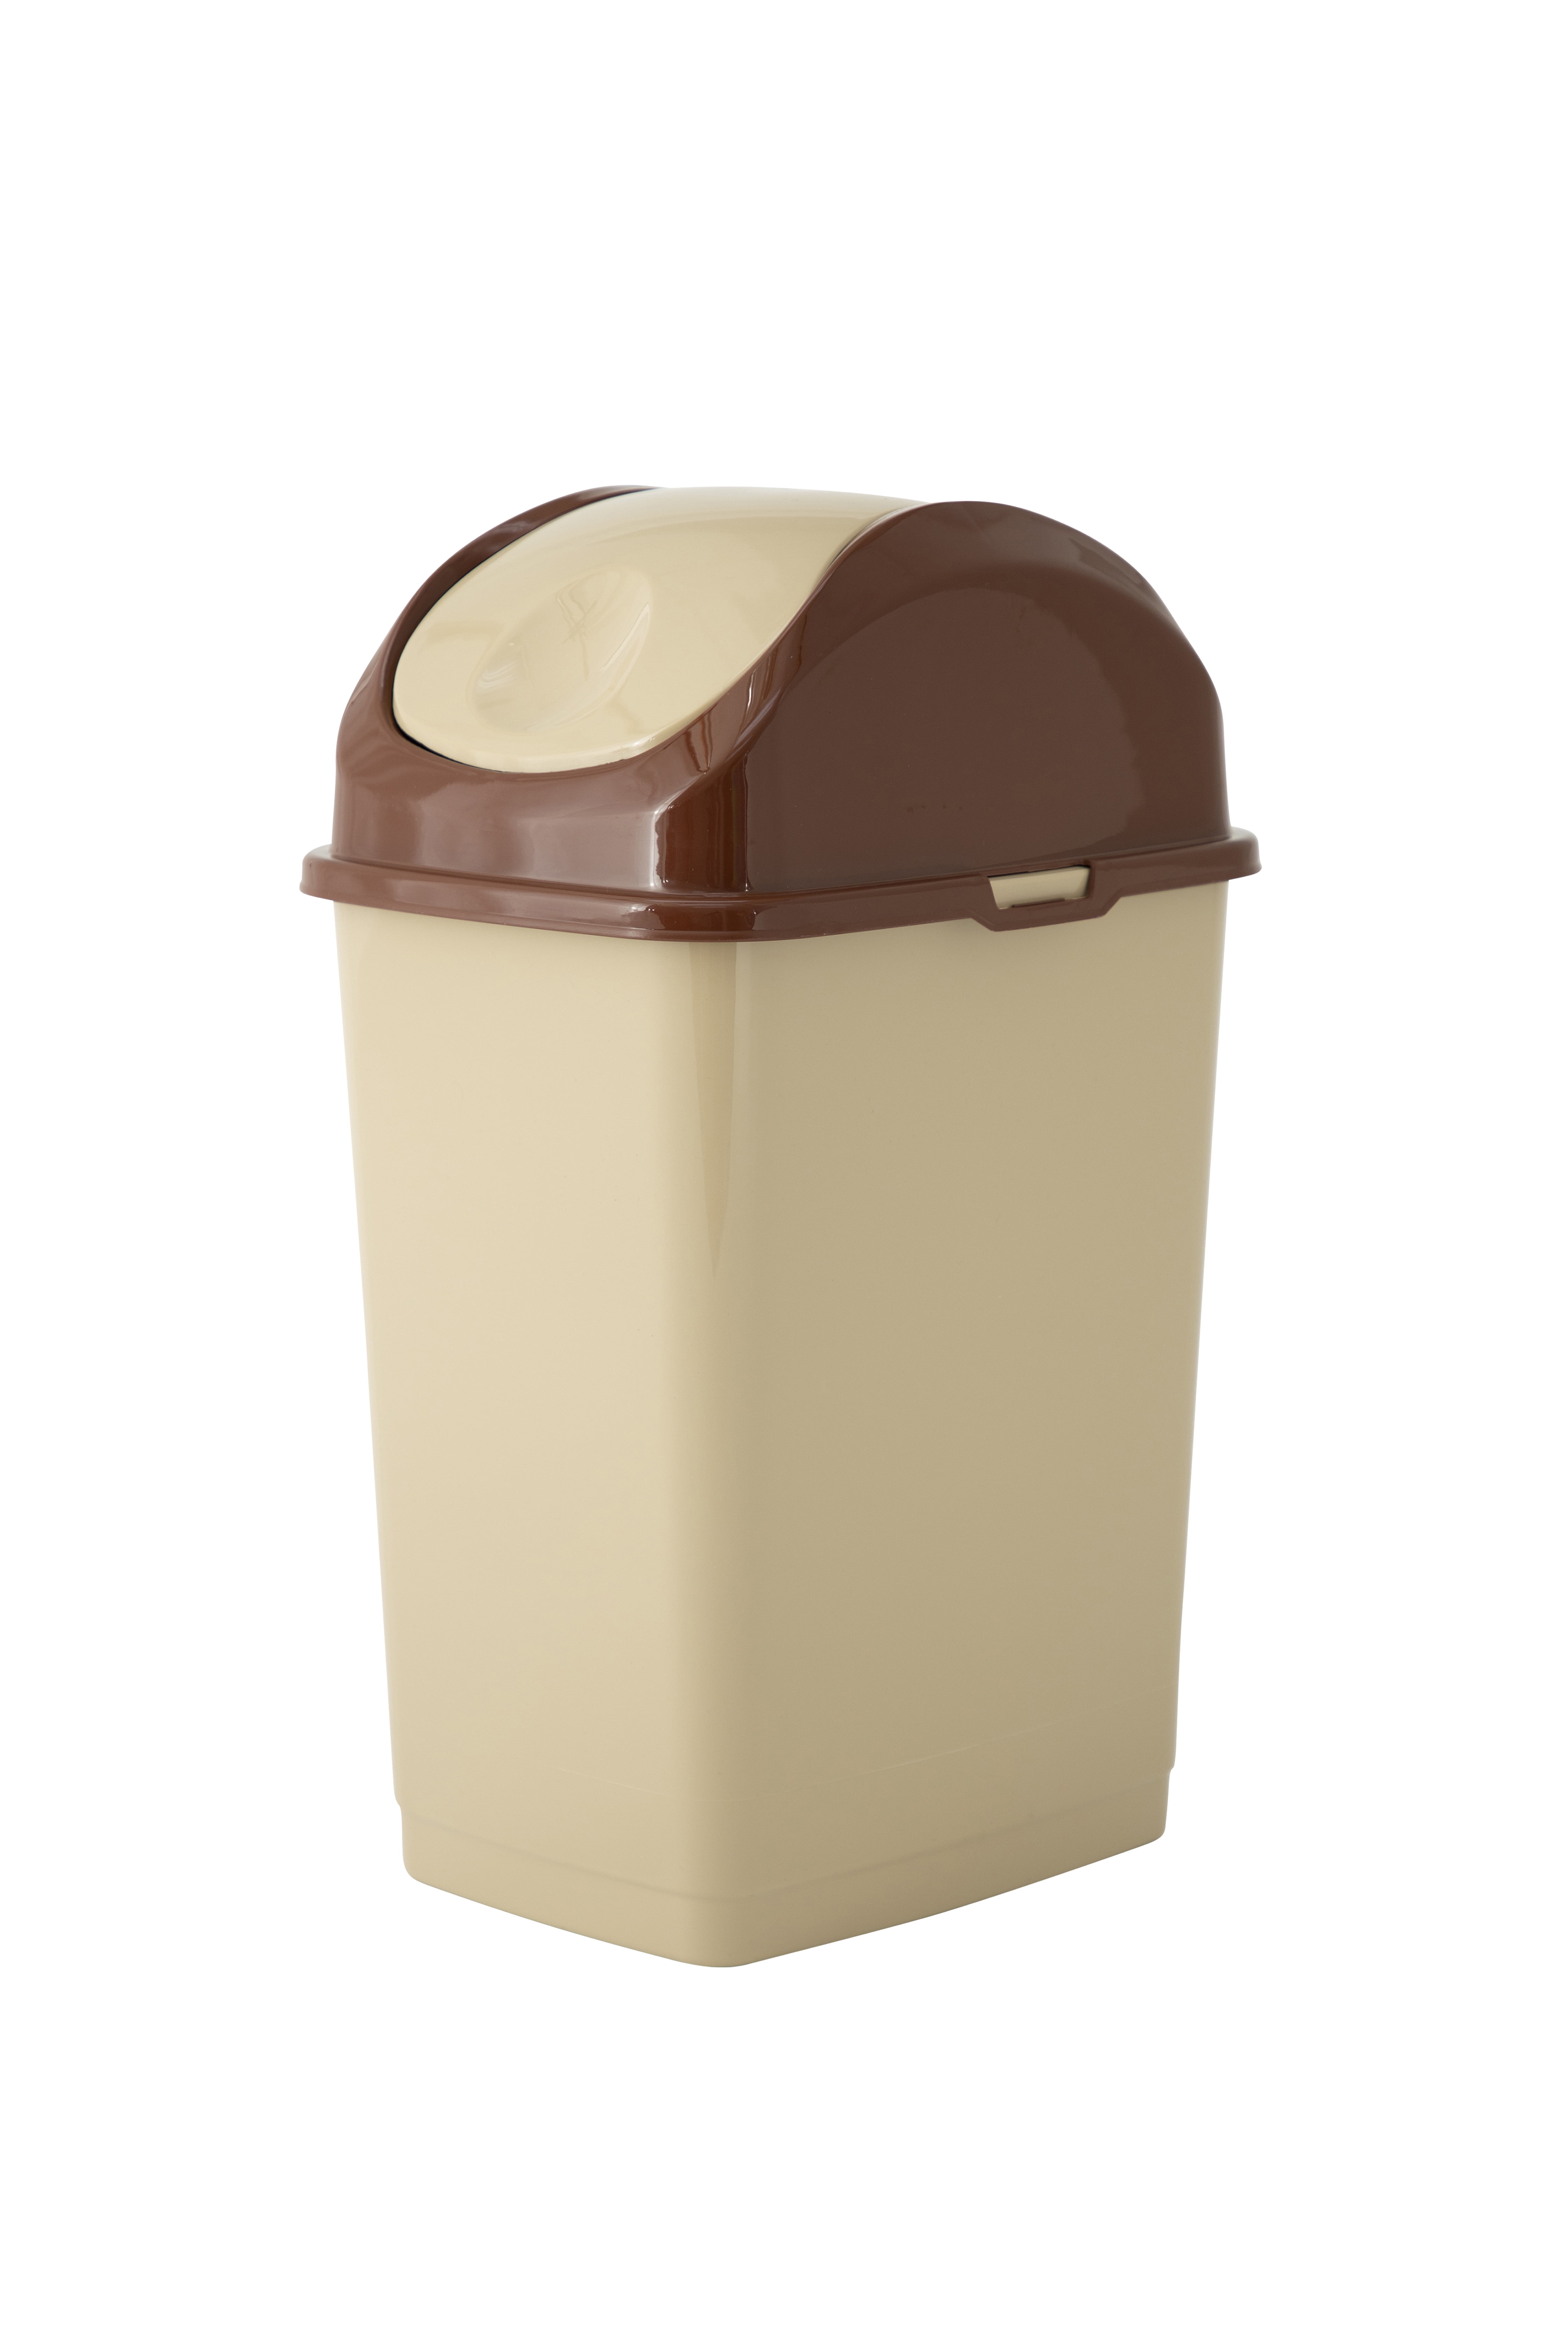 ColorLife 23 Gallons Plastic Swing Top Trash Can